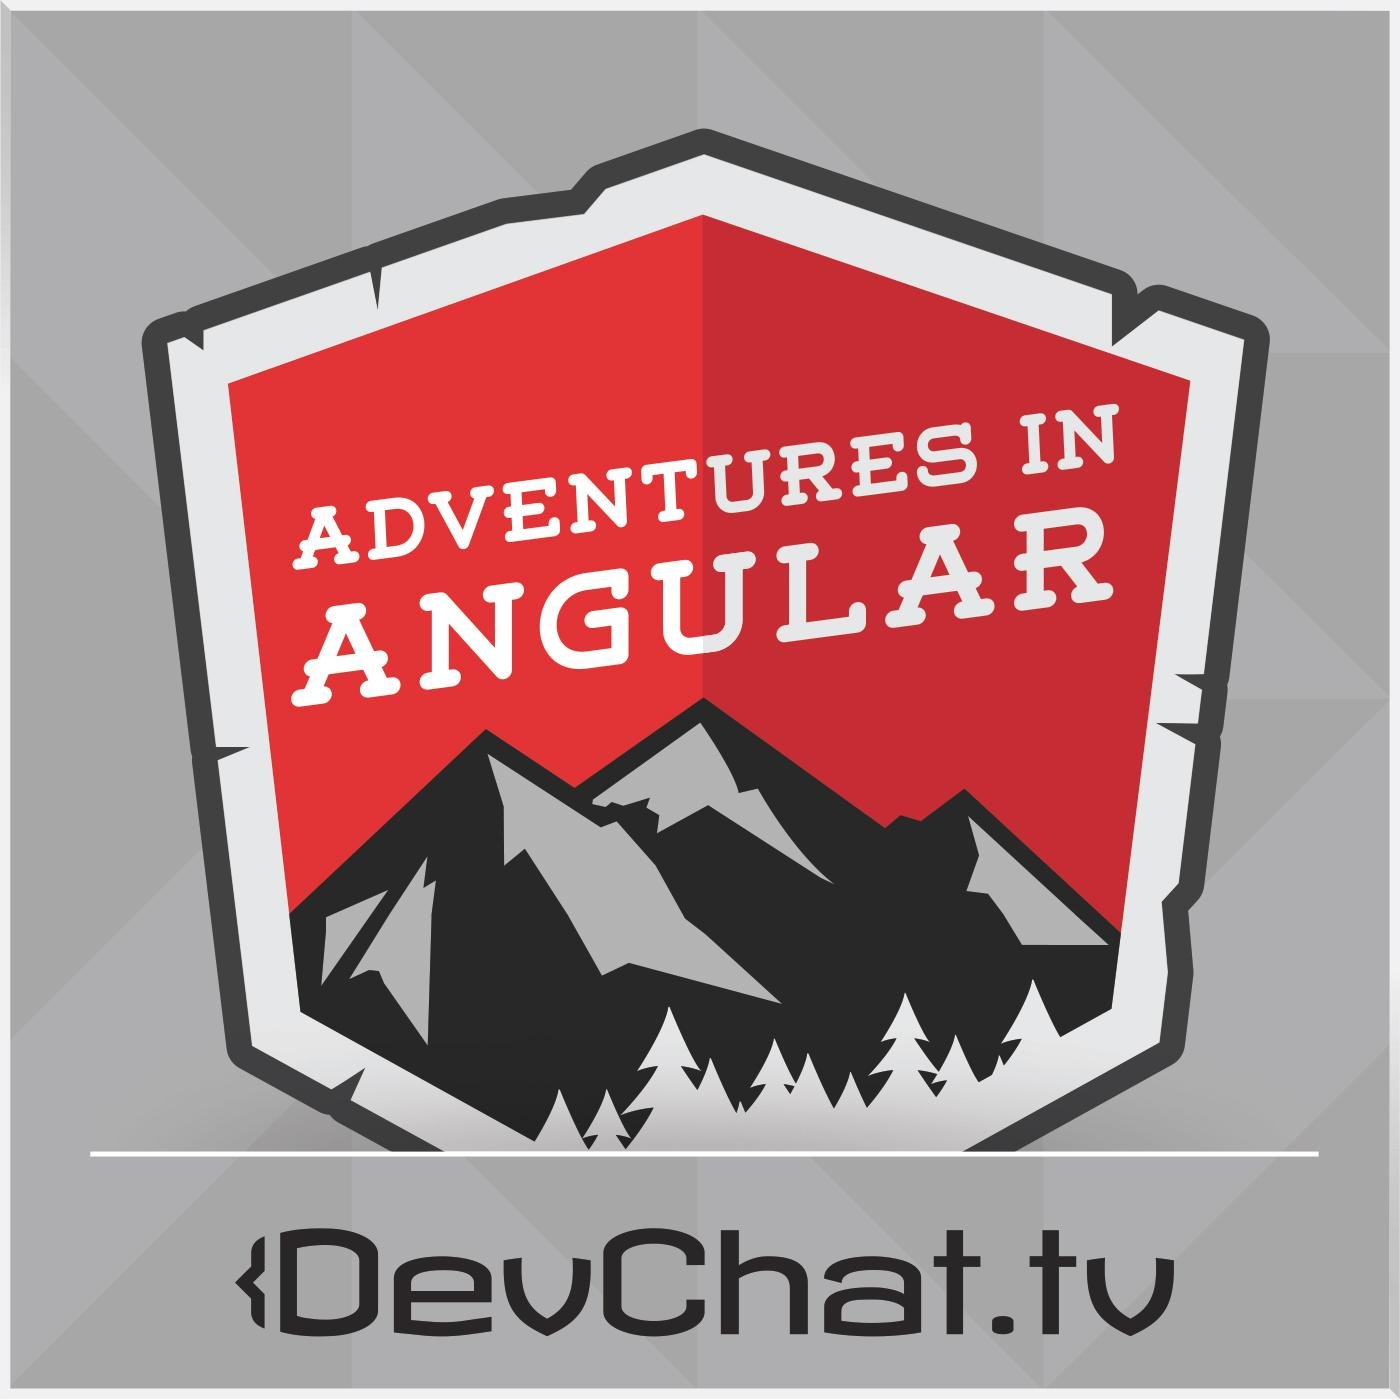 The podcast about Angular and building awesome things on the internet.